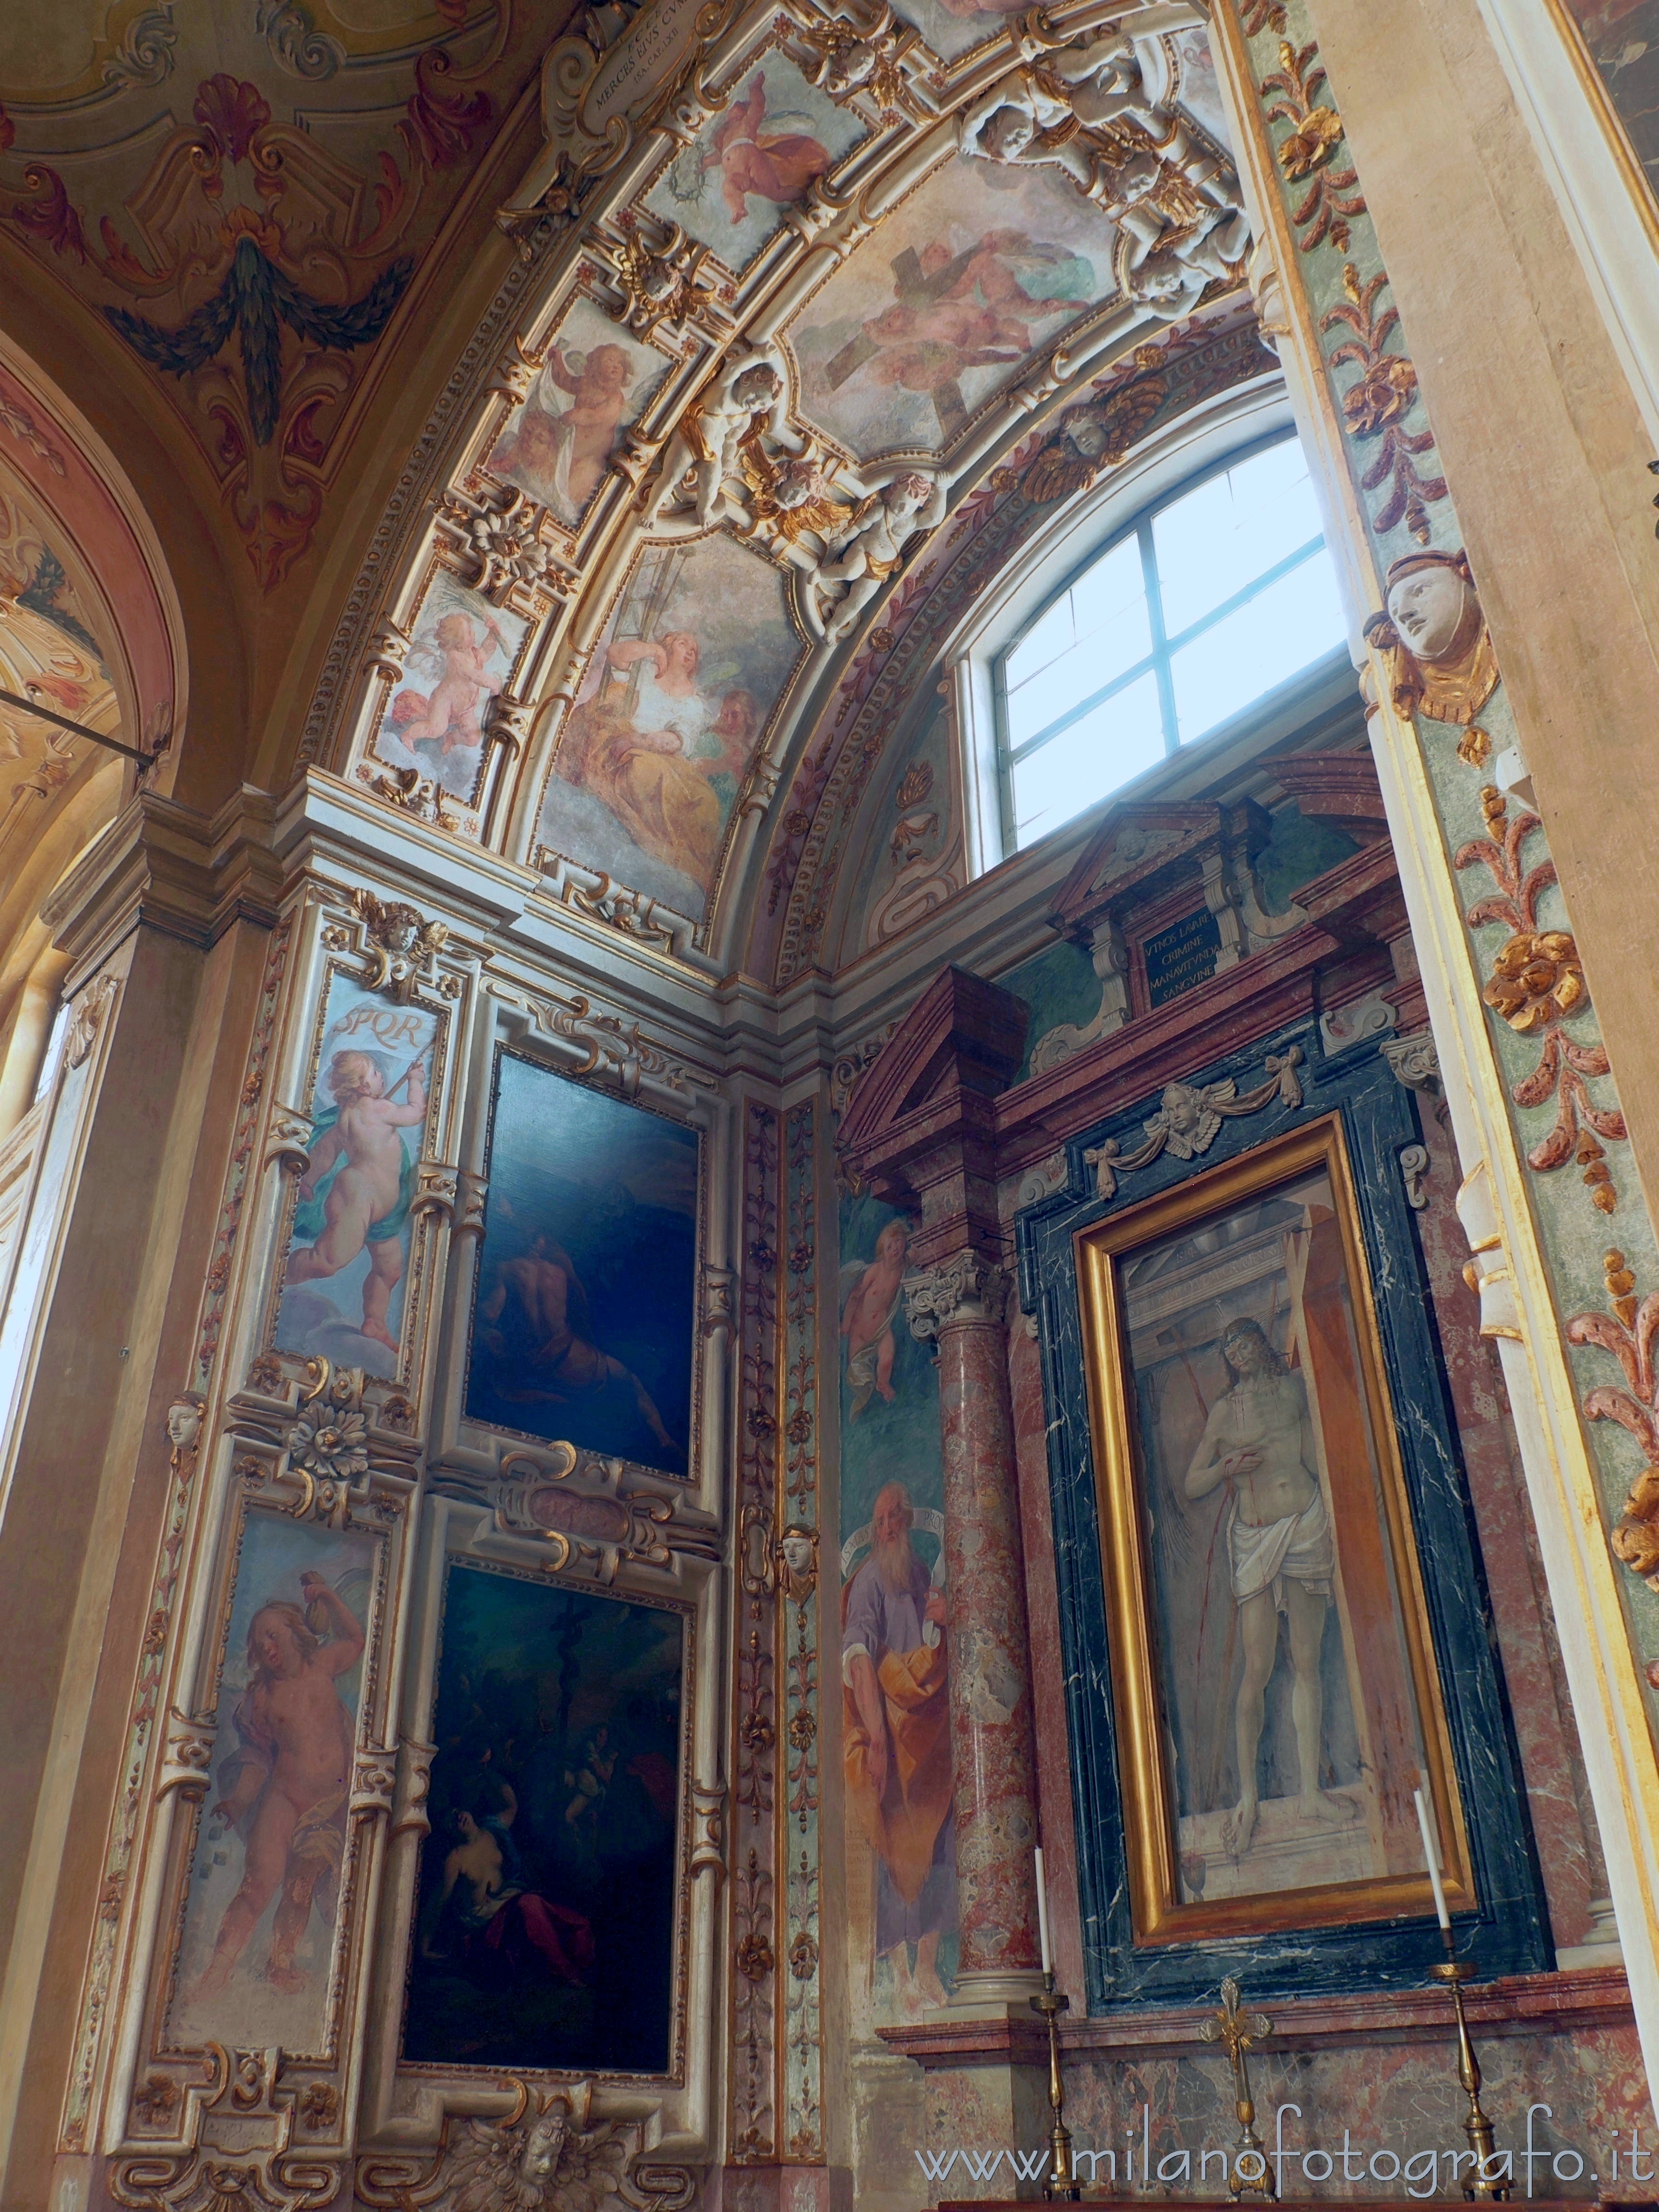 Vimercate (Monza e Brianza, Italy): Left three-quarter view of the Chapel of the Savior in the Sanctuary of the Blessed Virgin of the Rosary - Vimercate (Monza e Brianza, Italy)